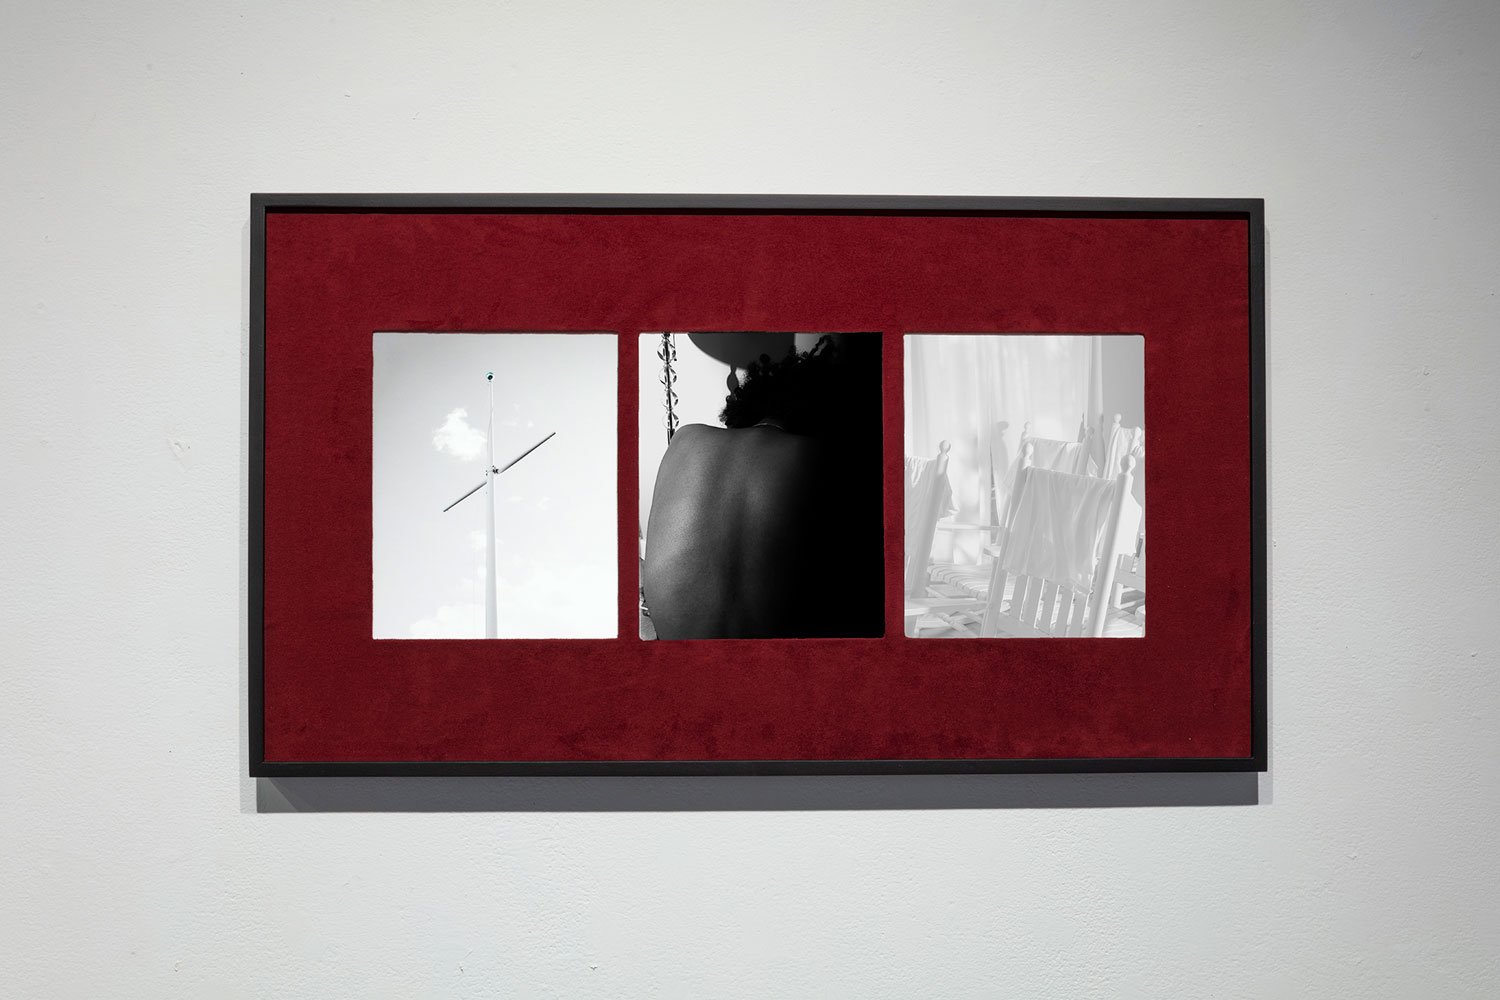   untitled (follow suit),  triptych 2021 10x24 in., 18x32 in. with frame archival pigment prints, burgundy suede 